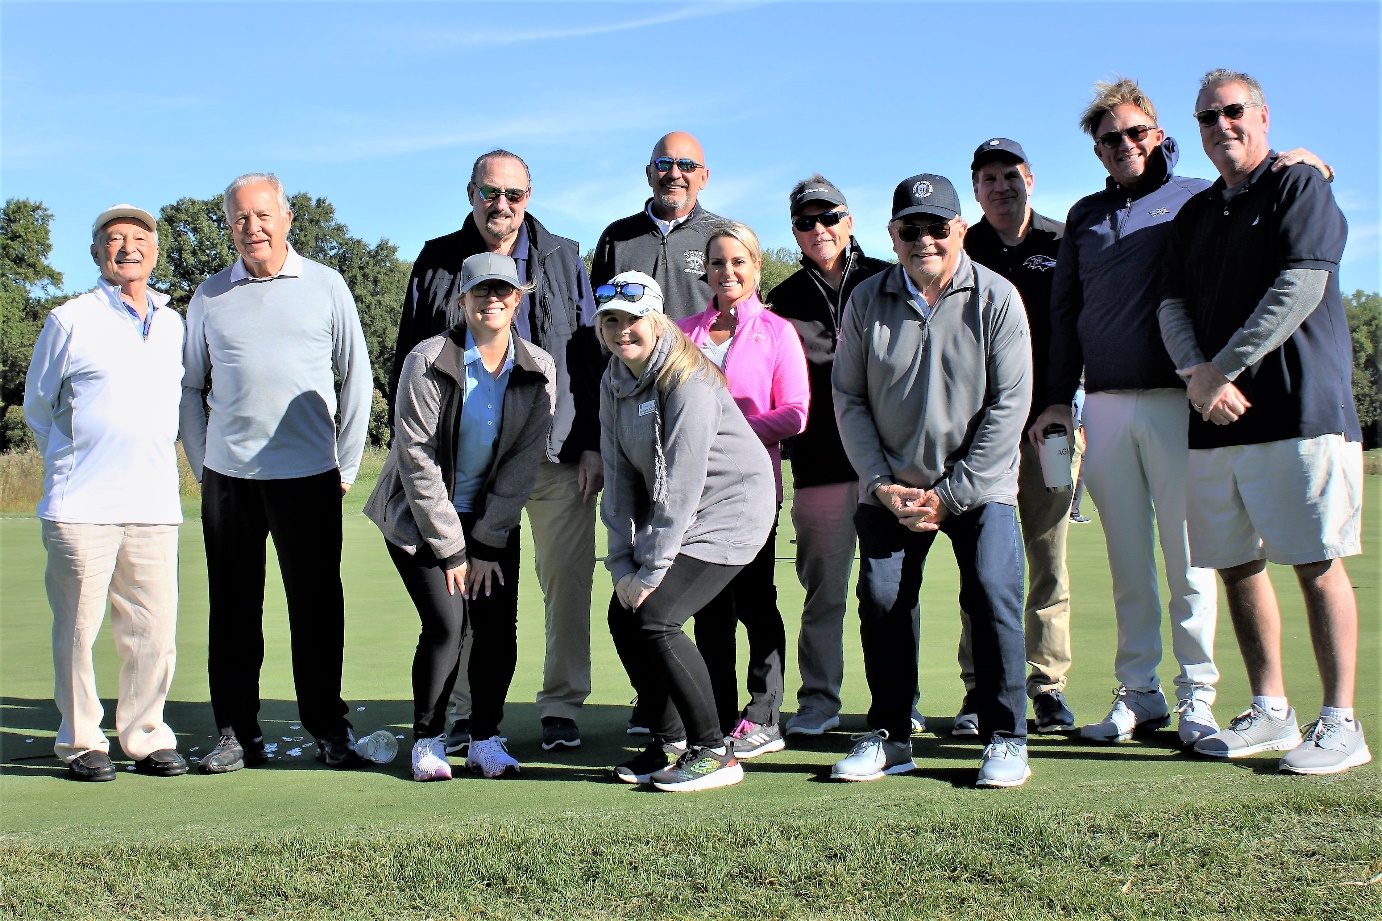 Hospice of the Chesapeake’s Golf Committee stands on the putting green before the start of the tournament. Pictured from left are Lou Zagarino, Gene Wetzel, Alan Levy, Tony Toskov, Randy Pleasant, Scott Mielke, Pat Taylor, Tom Hogan, Front Row: Lauren Thurston, Nicole LaPier, Laura Toskov and Ken Stanley. Not pictured: Tom Howell, John Warner Sr., Brian Flynn, Brian Chisholm, Jimmy Wilburn, Charlie Bagley, and Charlie Priola.